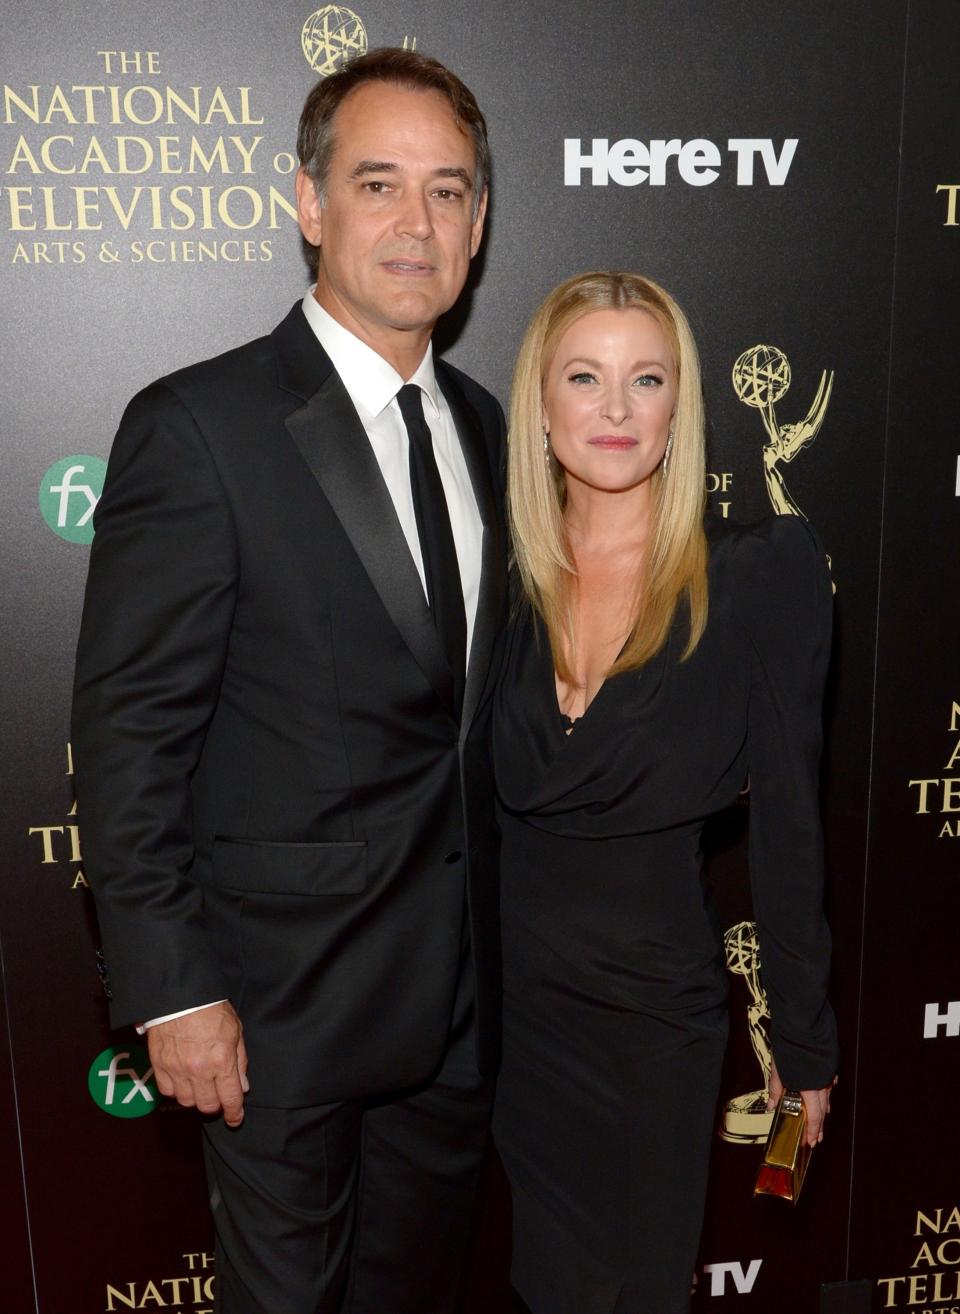 Actors Jon Lindstrom and Cady McClain, pictured in 2014, are divorcing after 10 years together.